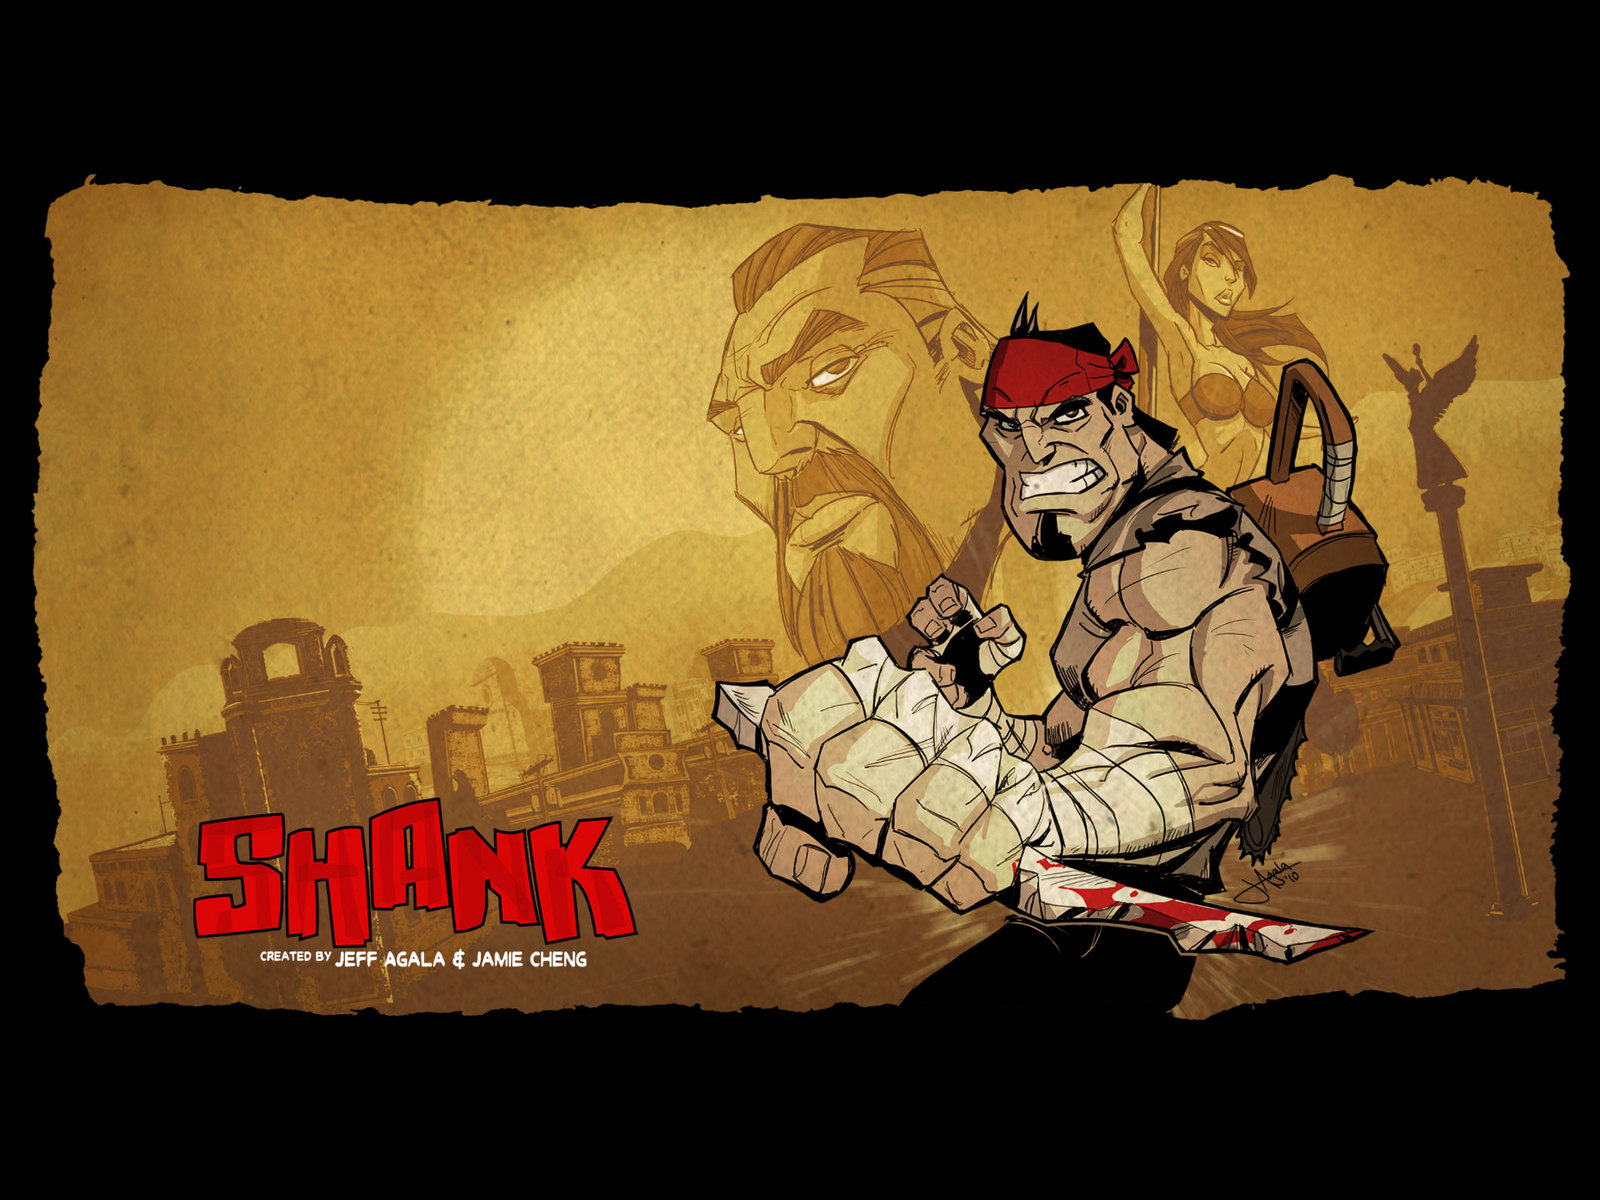 Shank 2 announced, coming early 2012